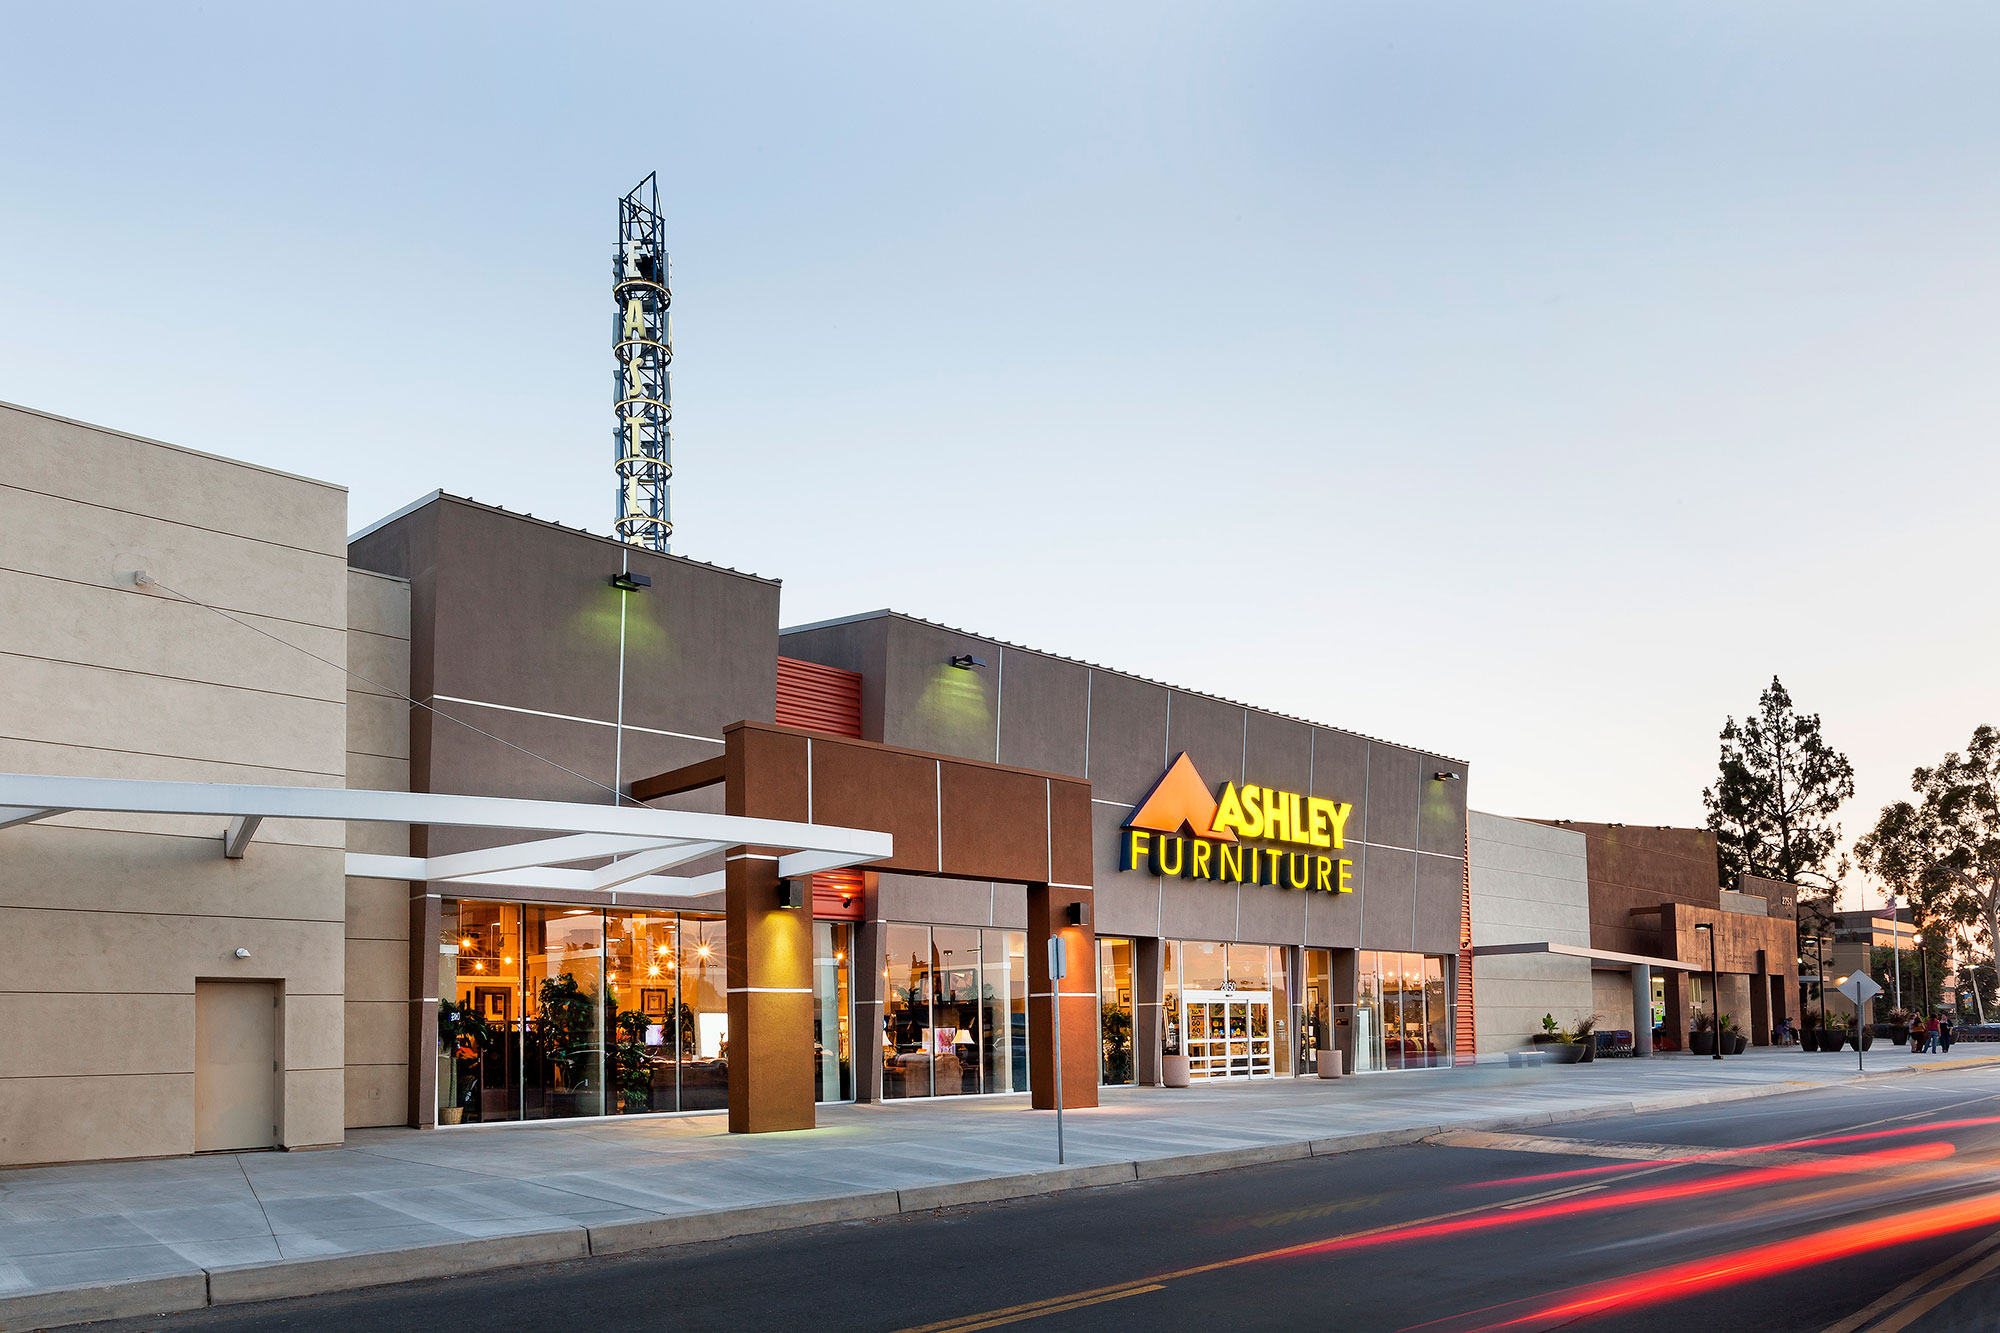 Ashley Furniture Debuts 50,000-SF Store | KTGY Architecture + Planning